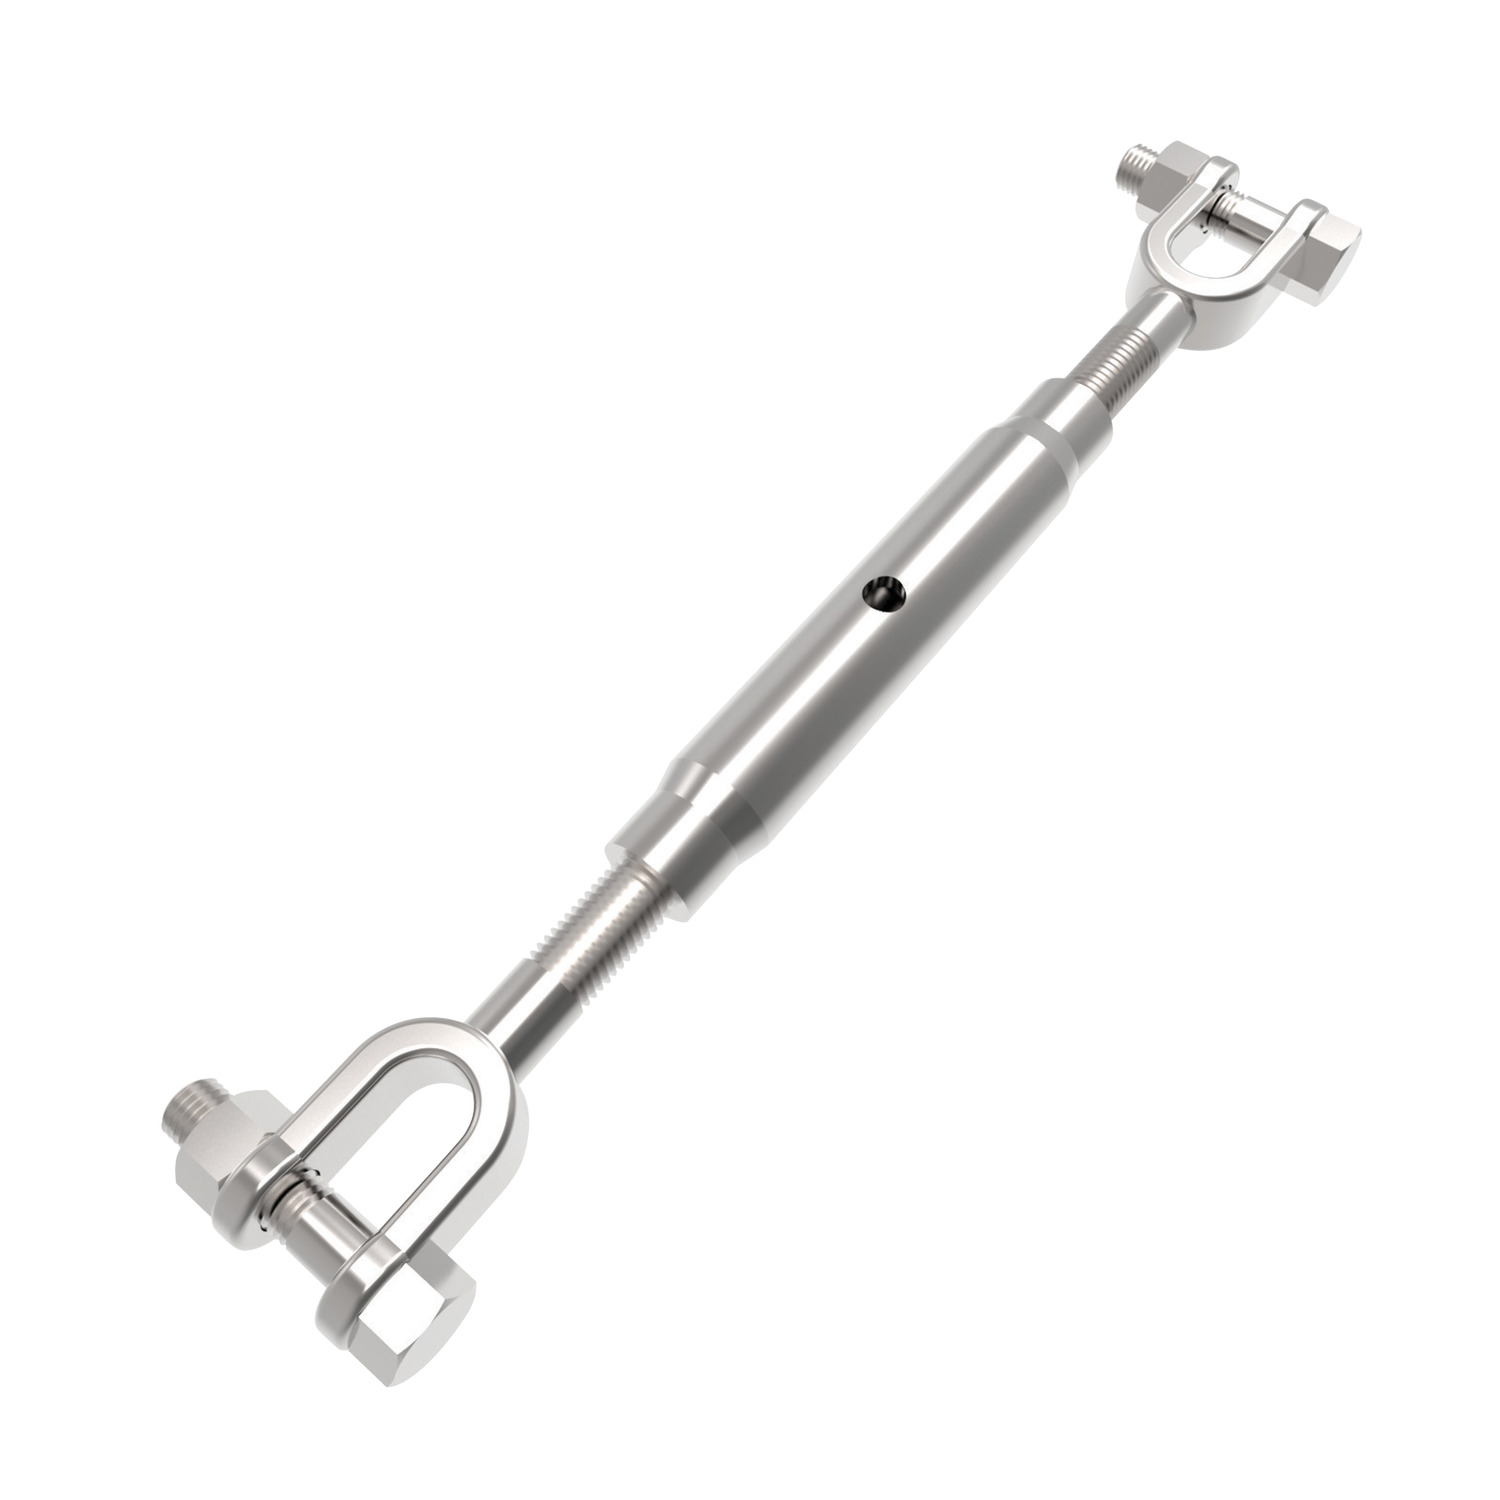 R3820 - Jaw End Pipe Body Turnbuckles